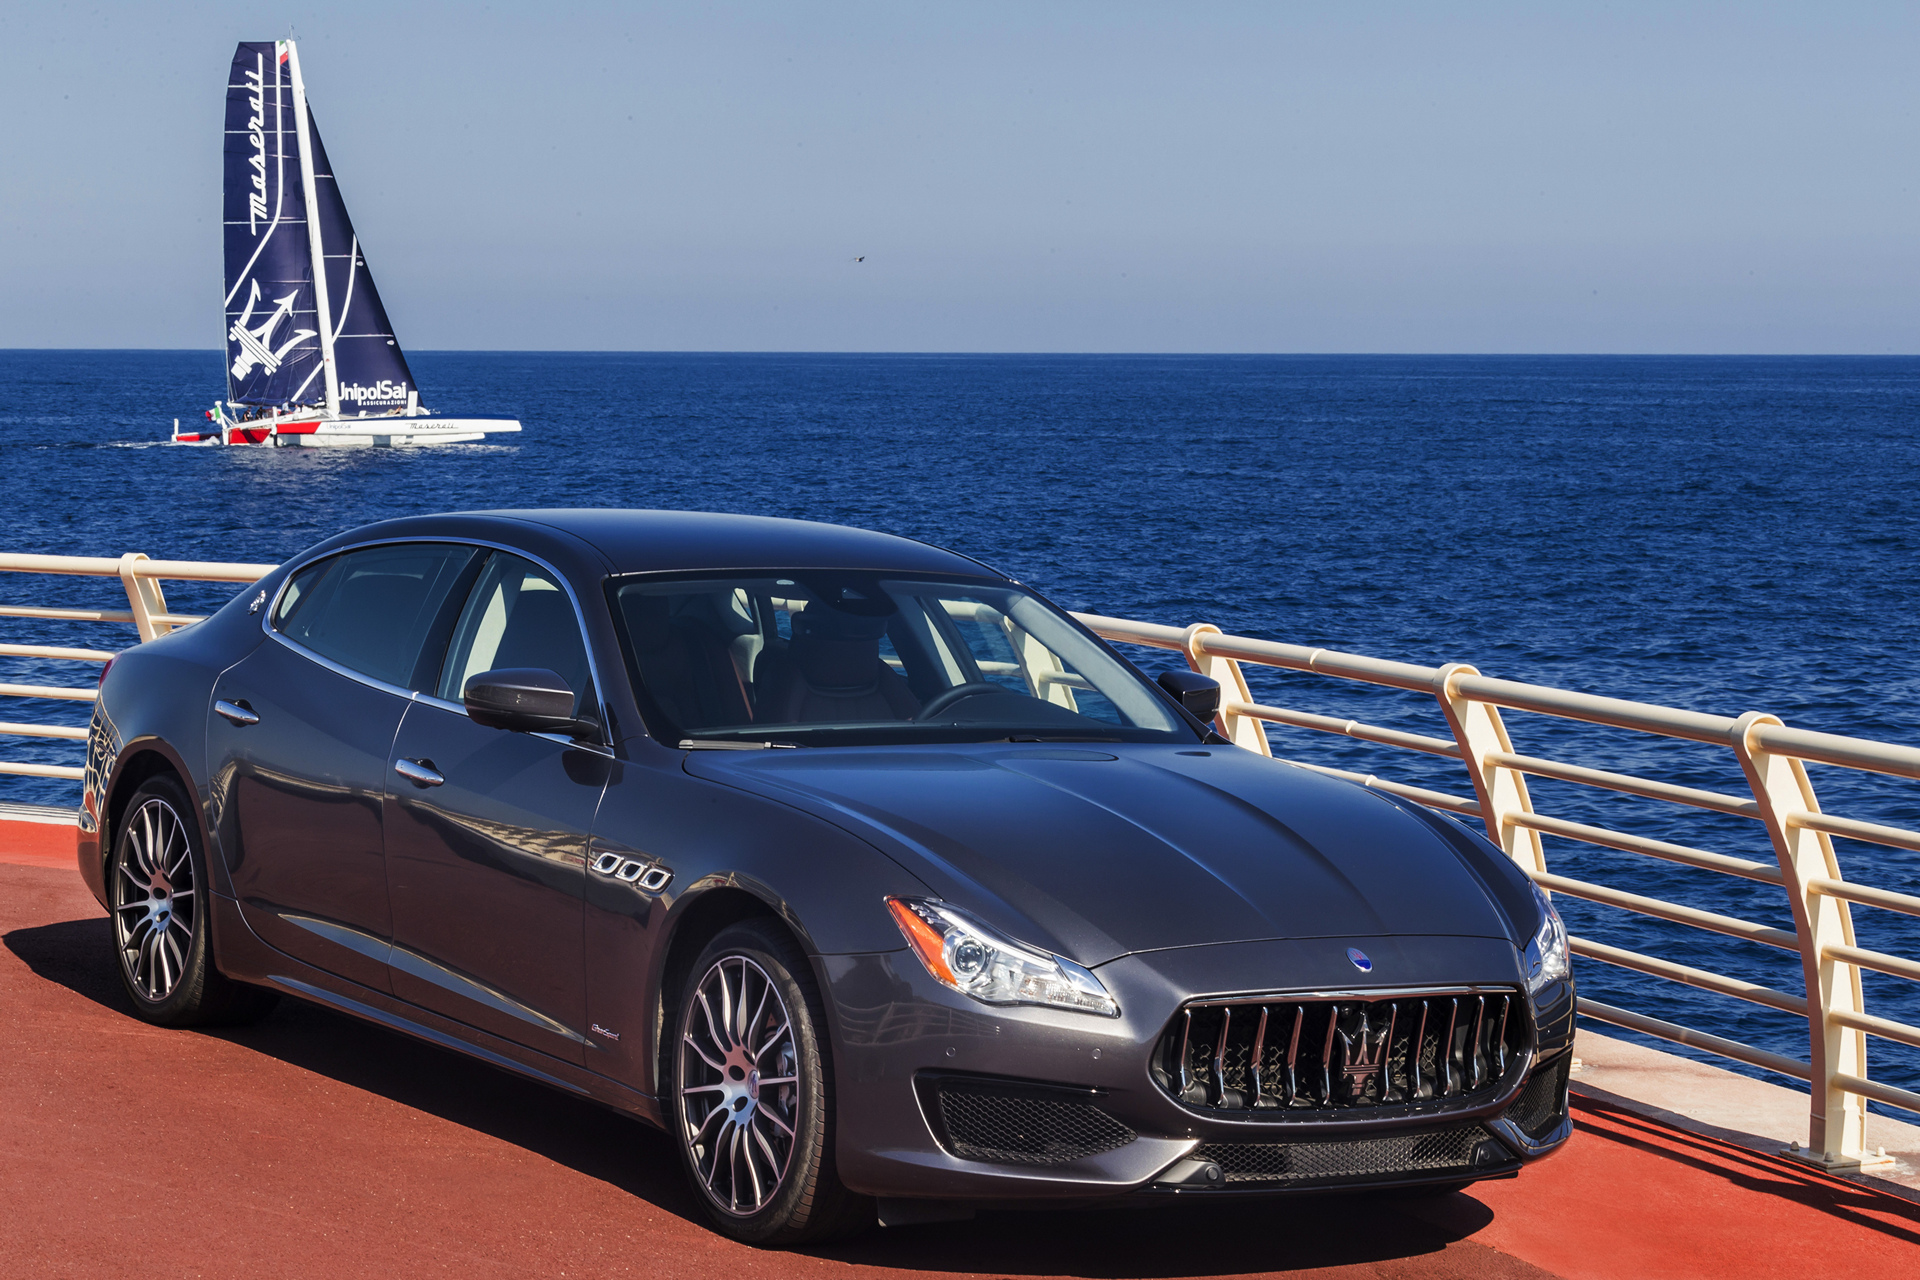 New Maserati Quattroporte and Multi70 in action © Fiat Chrysler Automobiles N.V.